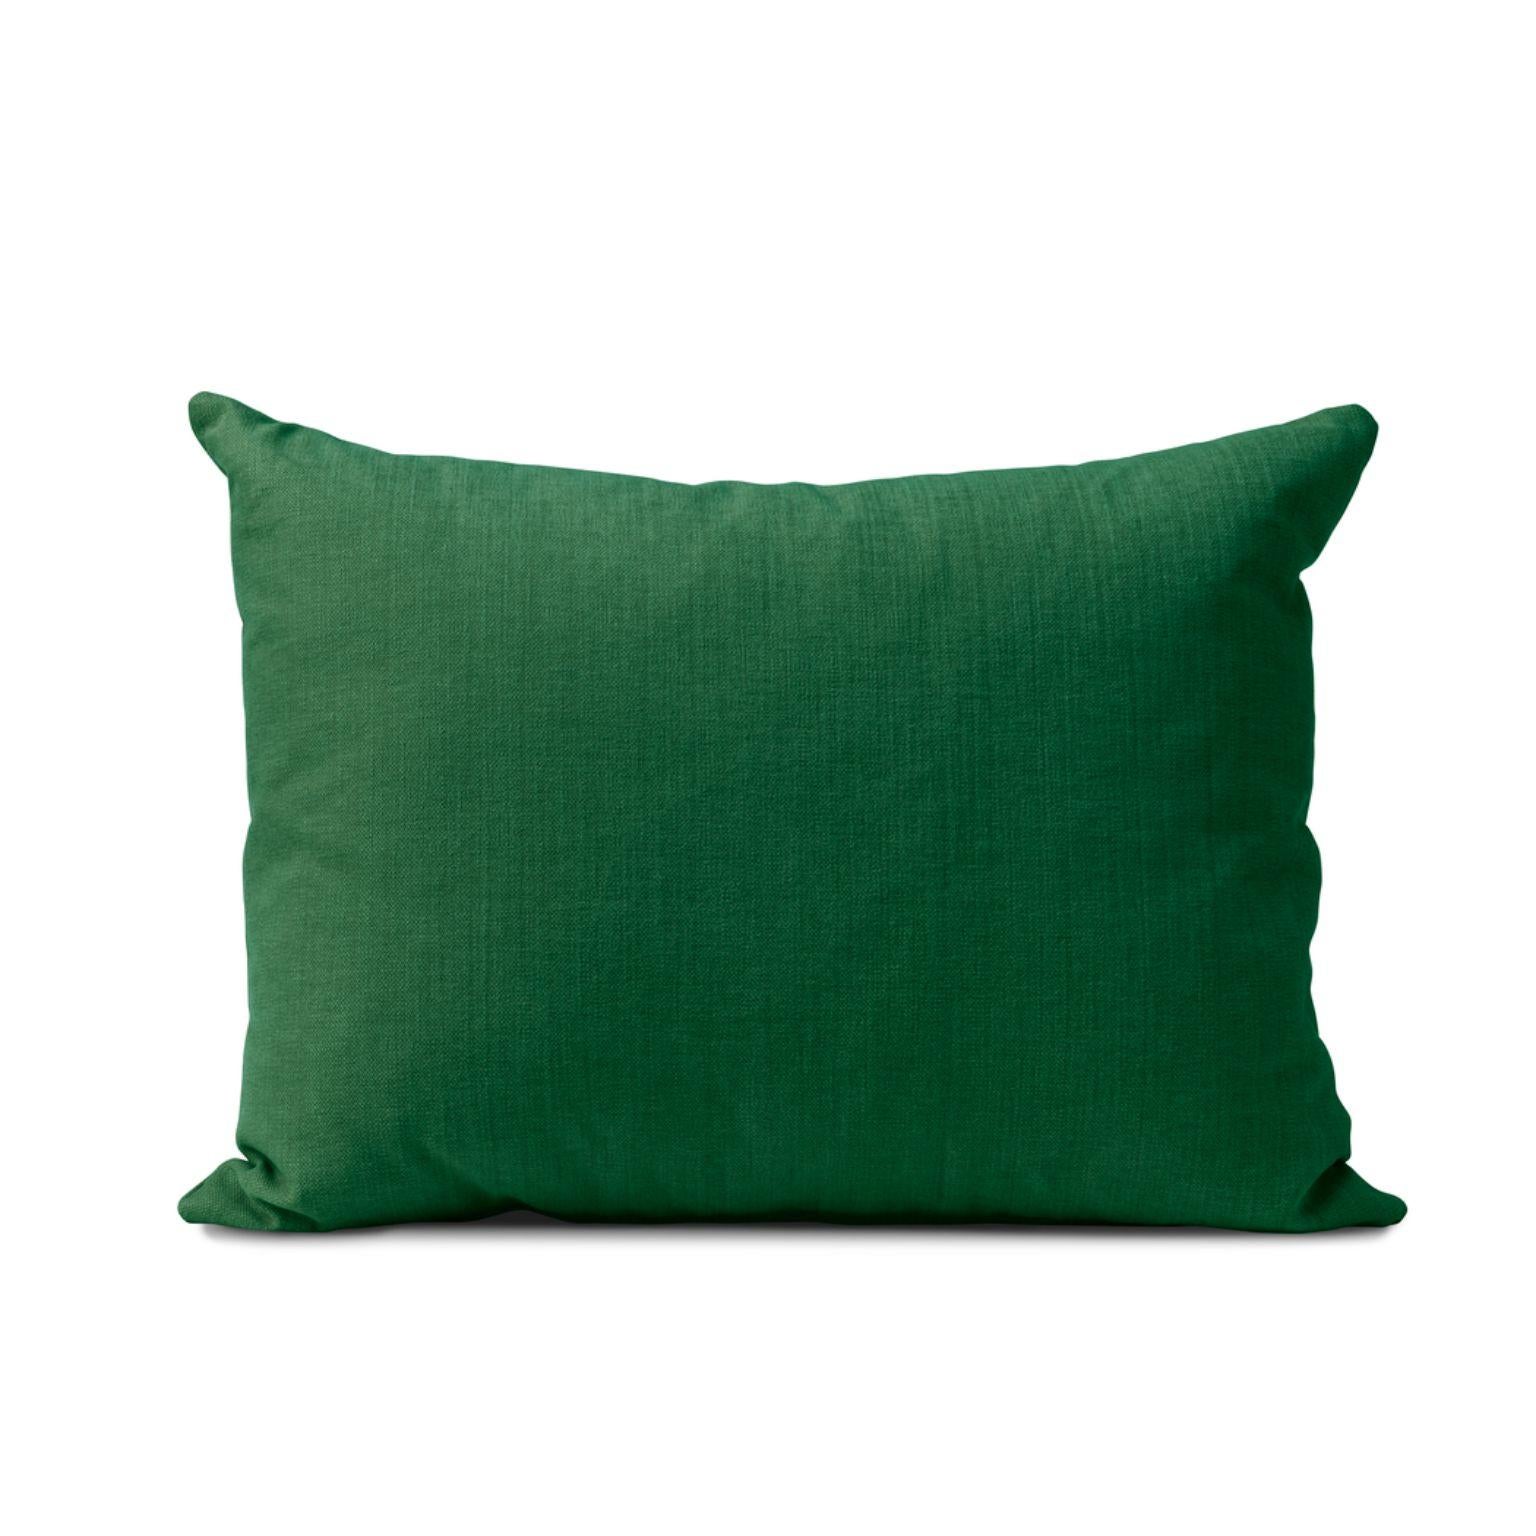 Galore cushion square emerald by Warm Nordic
Dimensions: D 70 x H 50 cm
Material: Textile upholstery, Granulate and feathers filling.
Weight: 1.4 kg
Also available in different colours and finishes.

An elegant oversized sofa cushion, which